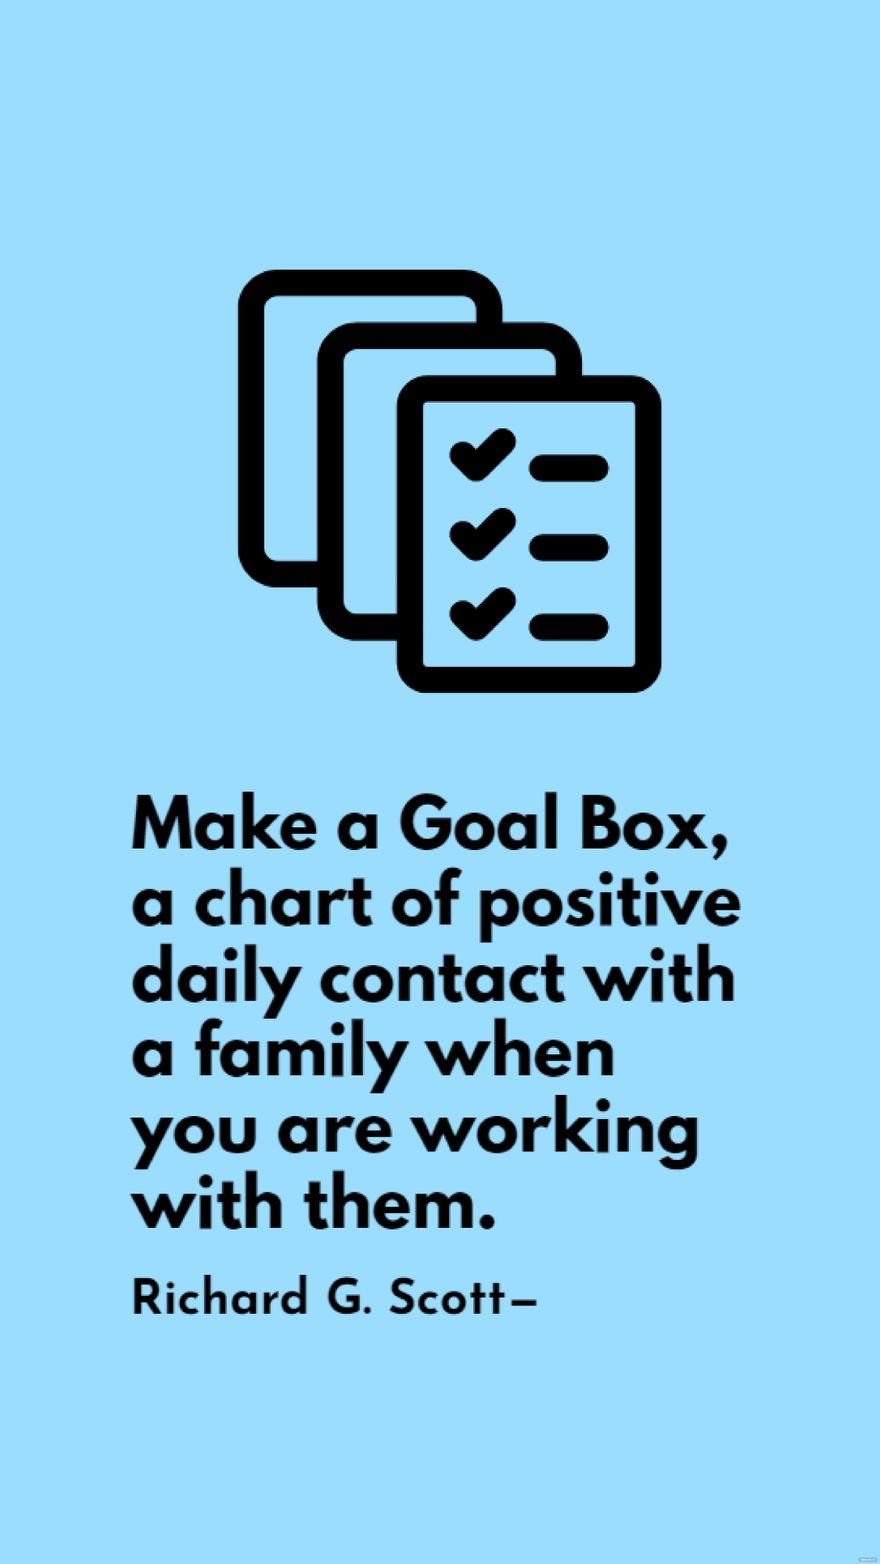 Free Richard G. Scott - Make a Goal Box, a chart of positive daily contact with a family when you are working with them.